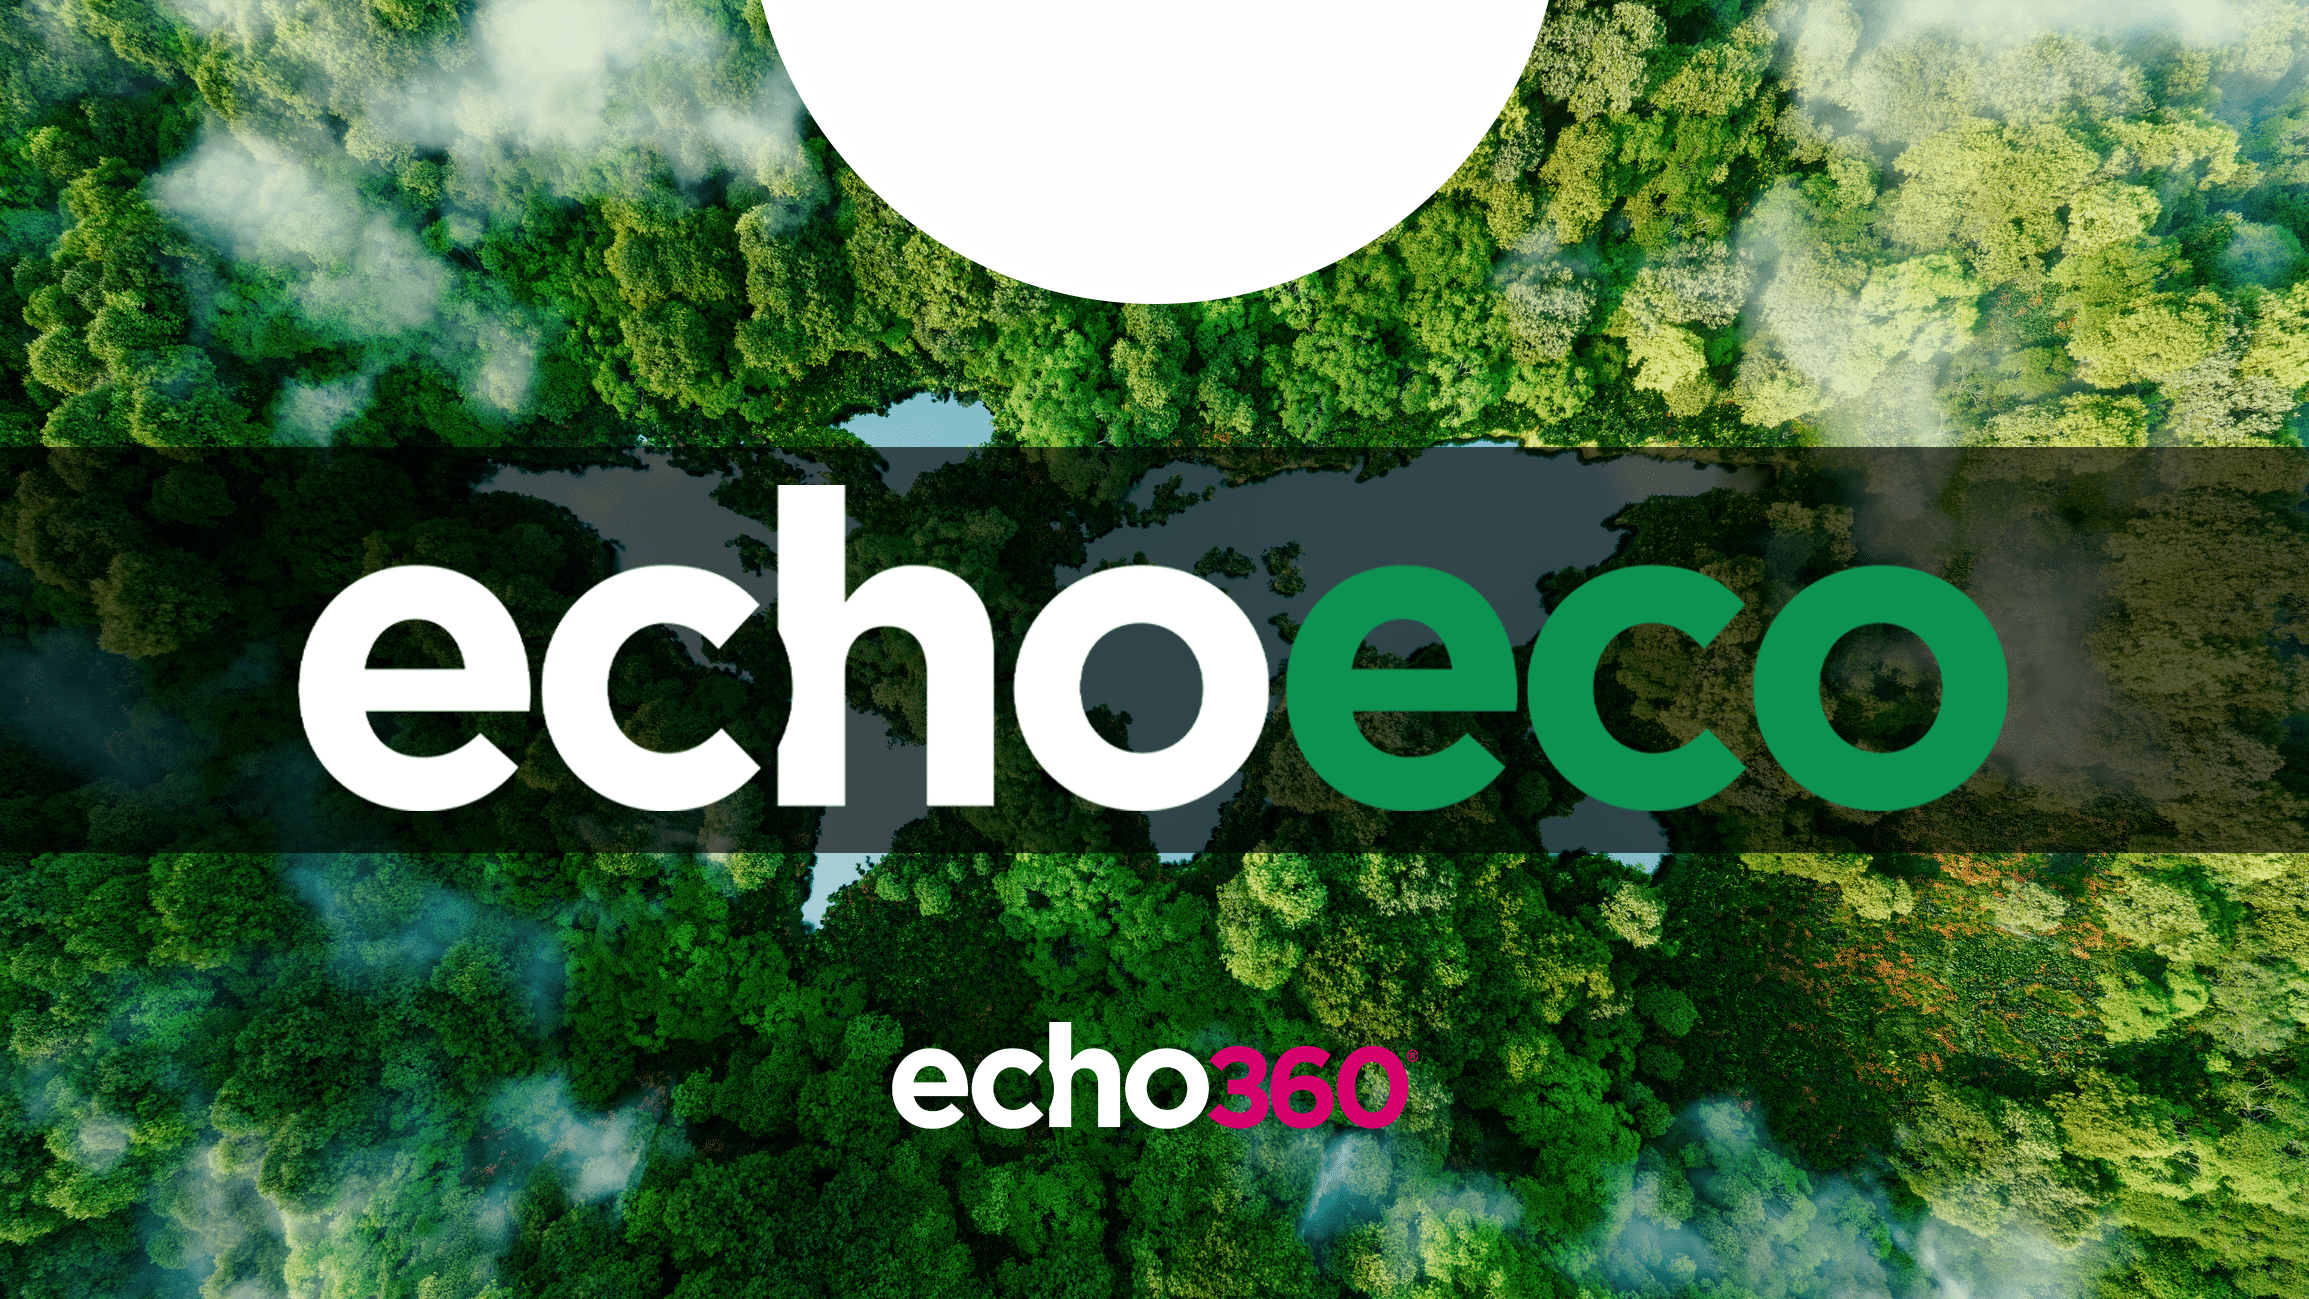 EchoEco's logo over forest background. Echo360's logo as a subheading, as EchoEco is it's environmental, social and governance webspace.